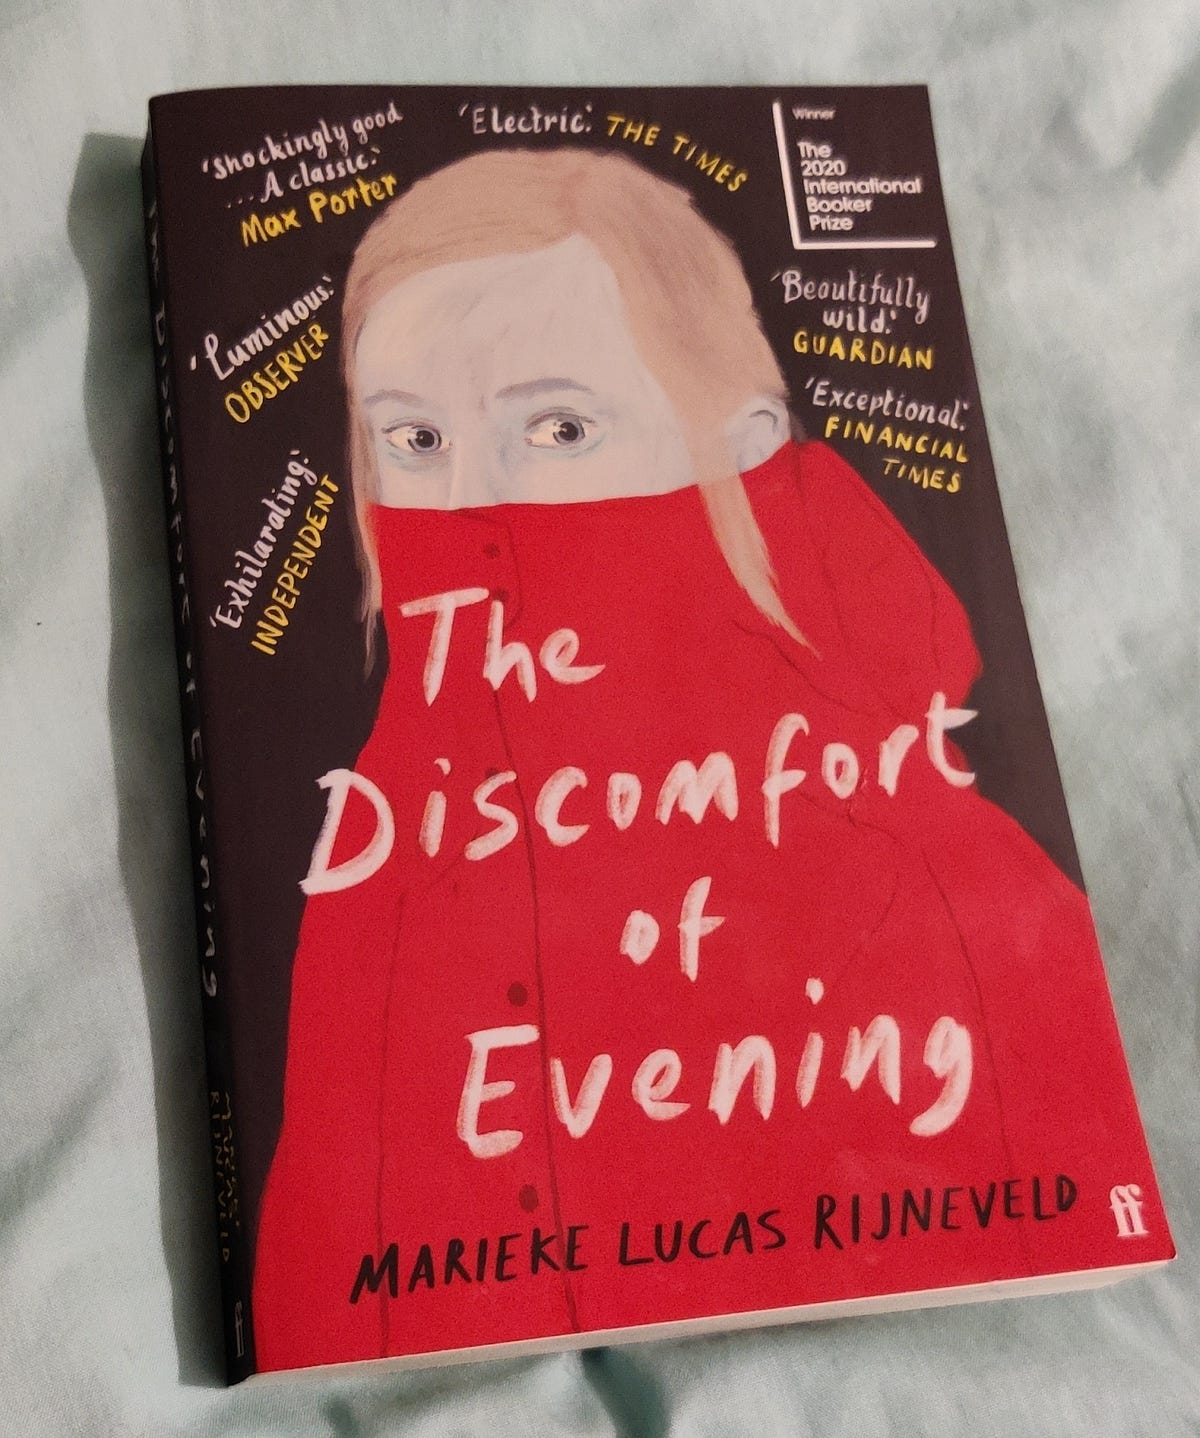 The Discomfort of Evening by Marieke Lucas Rijneveld by Ciarán Cooney Amateur Book Reviews Medium image